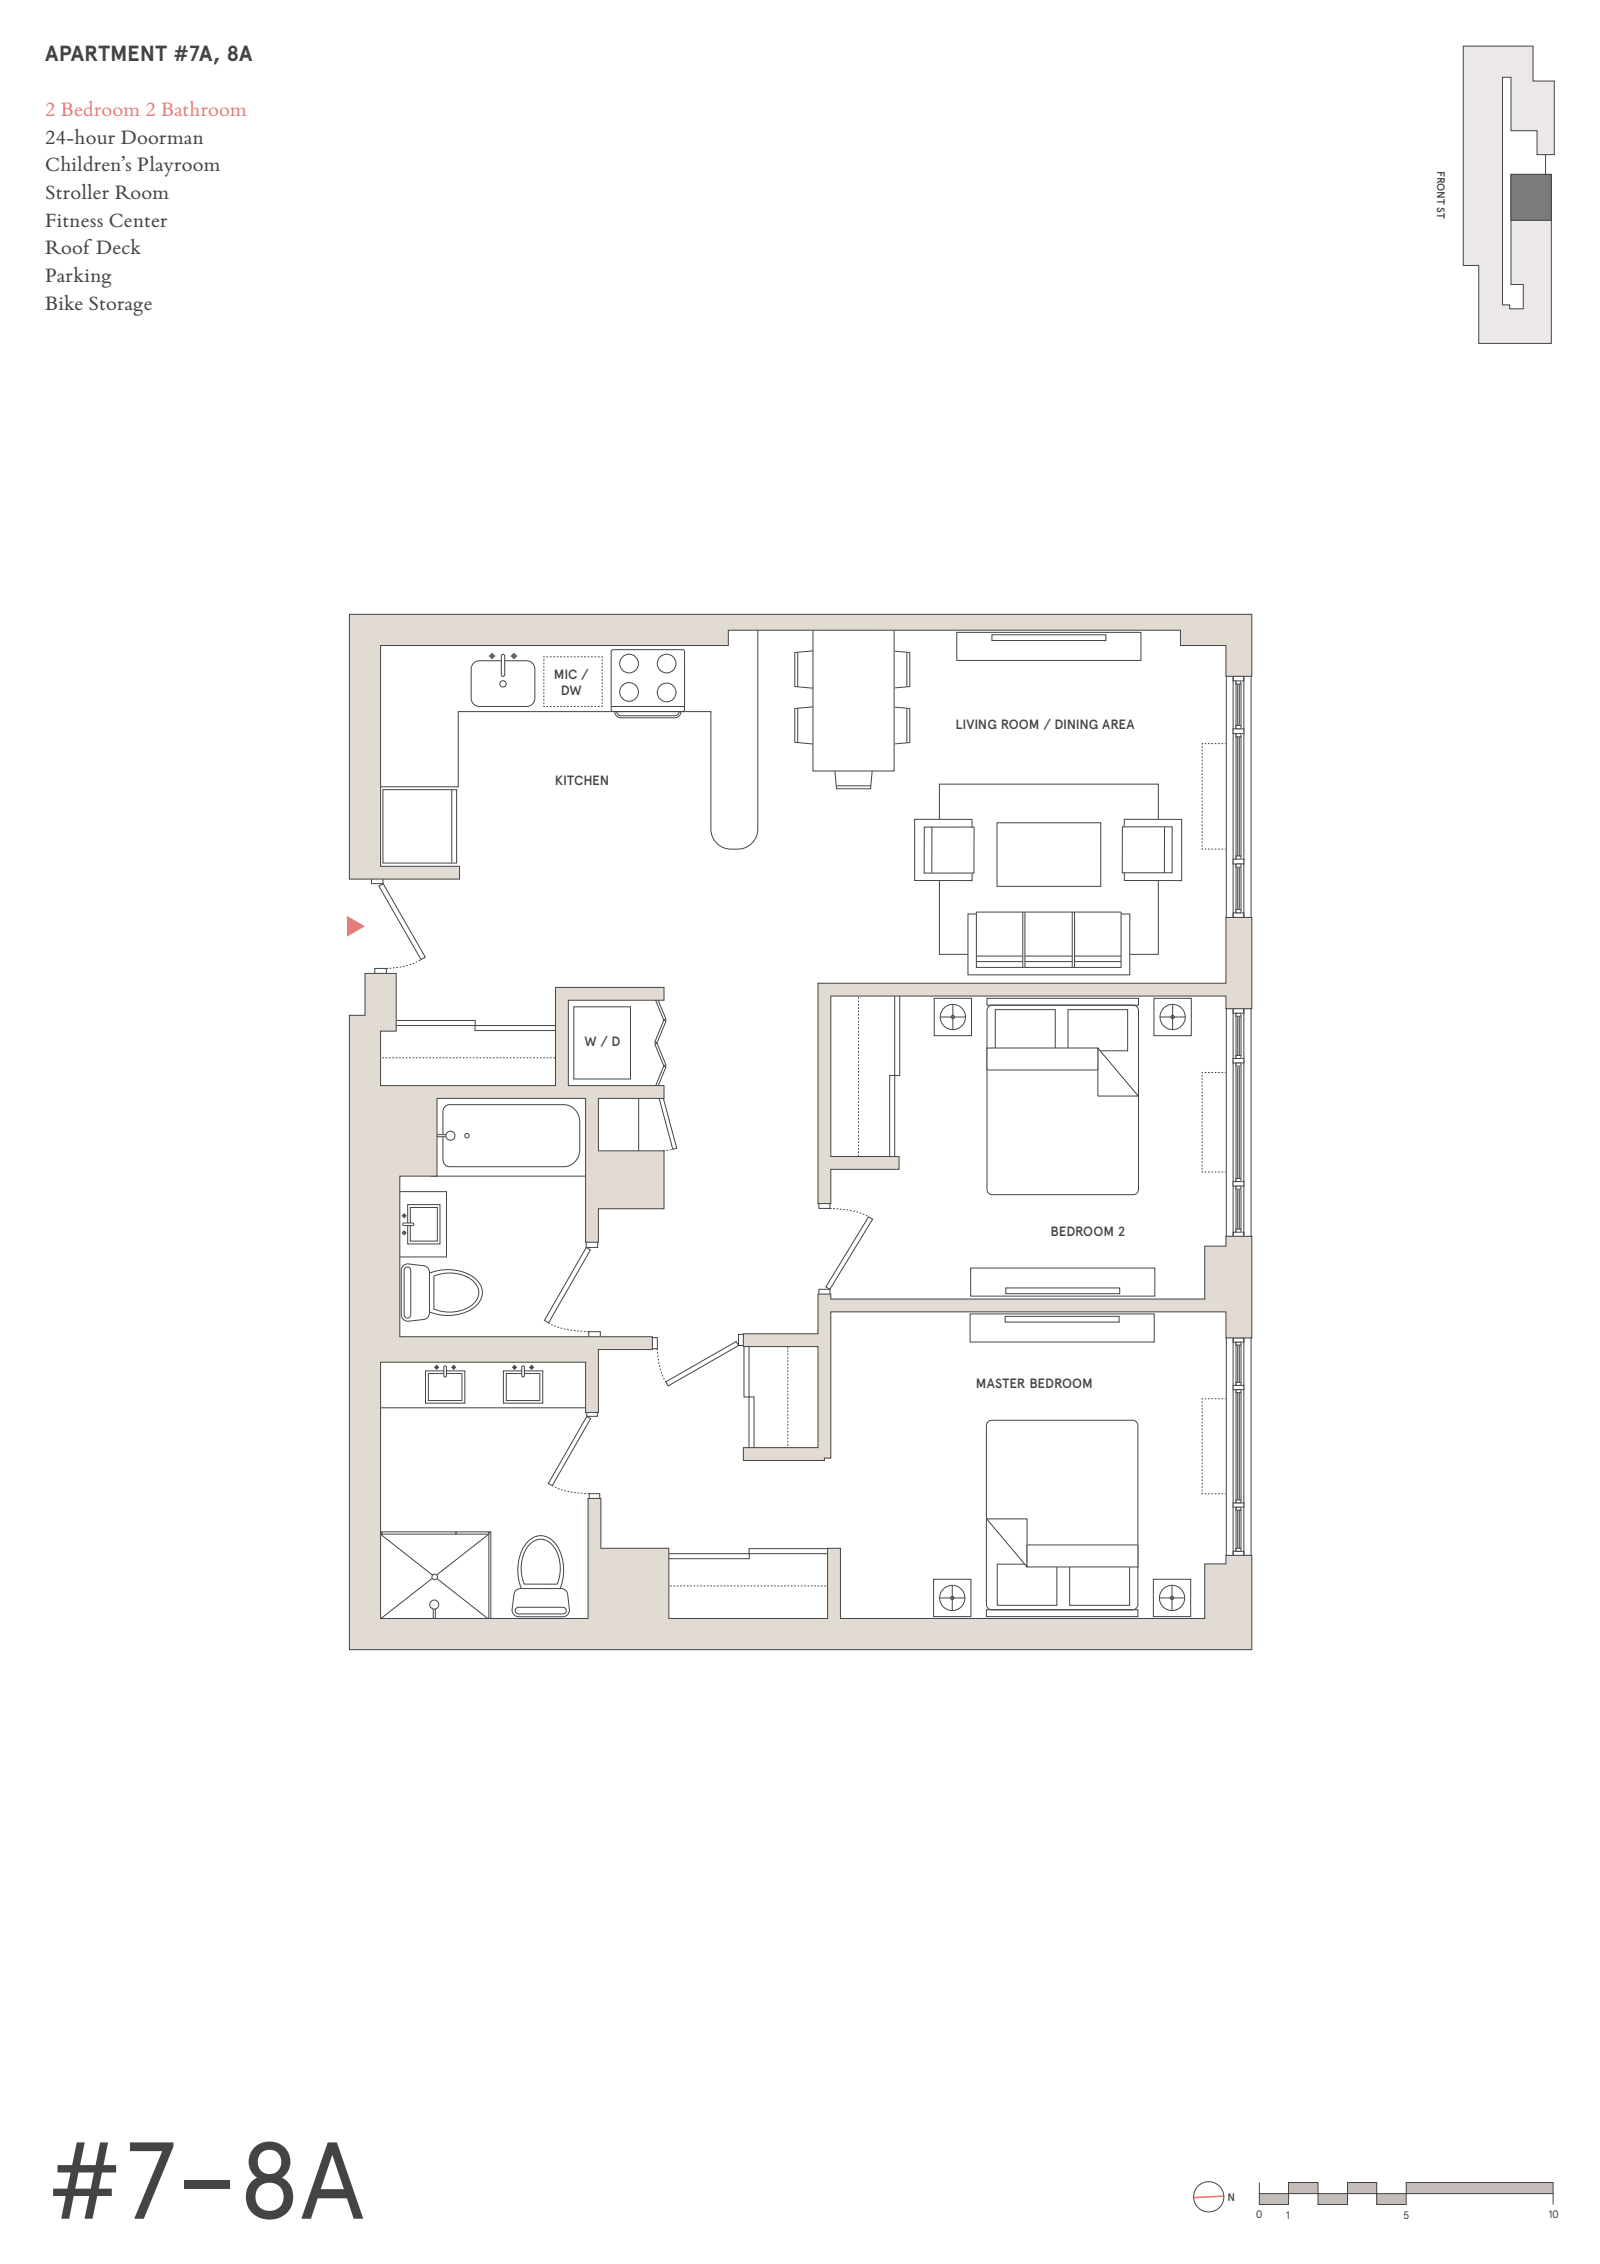 Floorplan for 181 Front Street, 8A